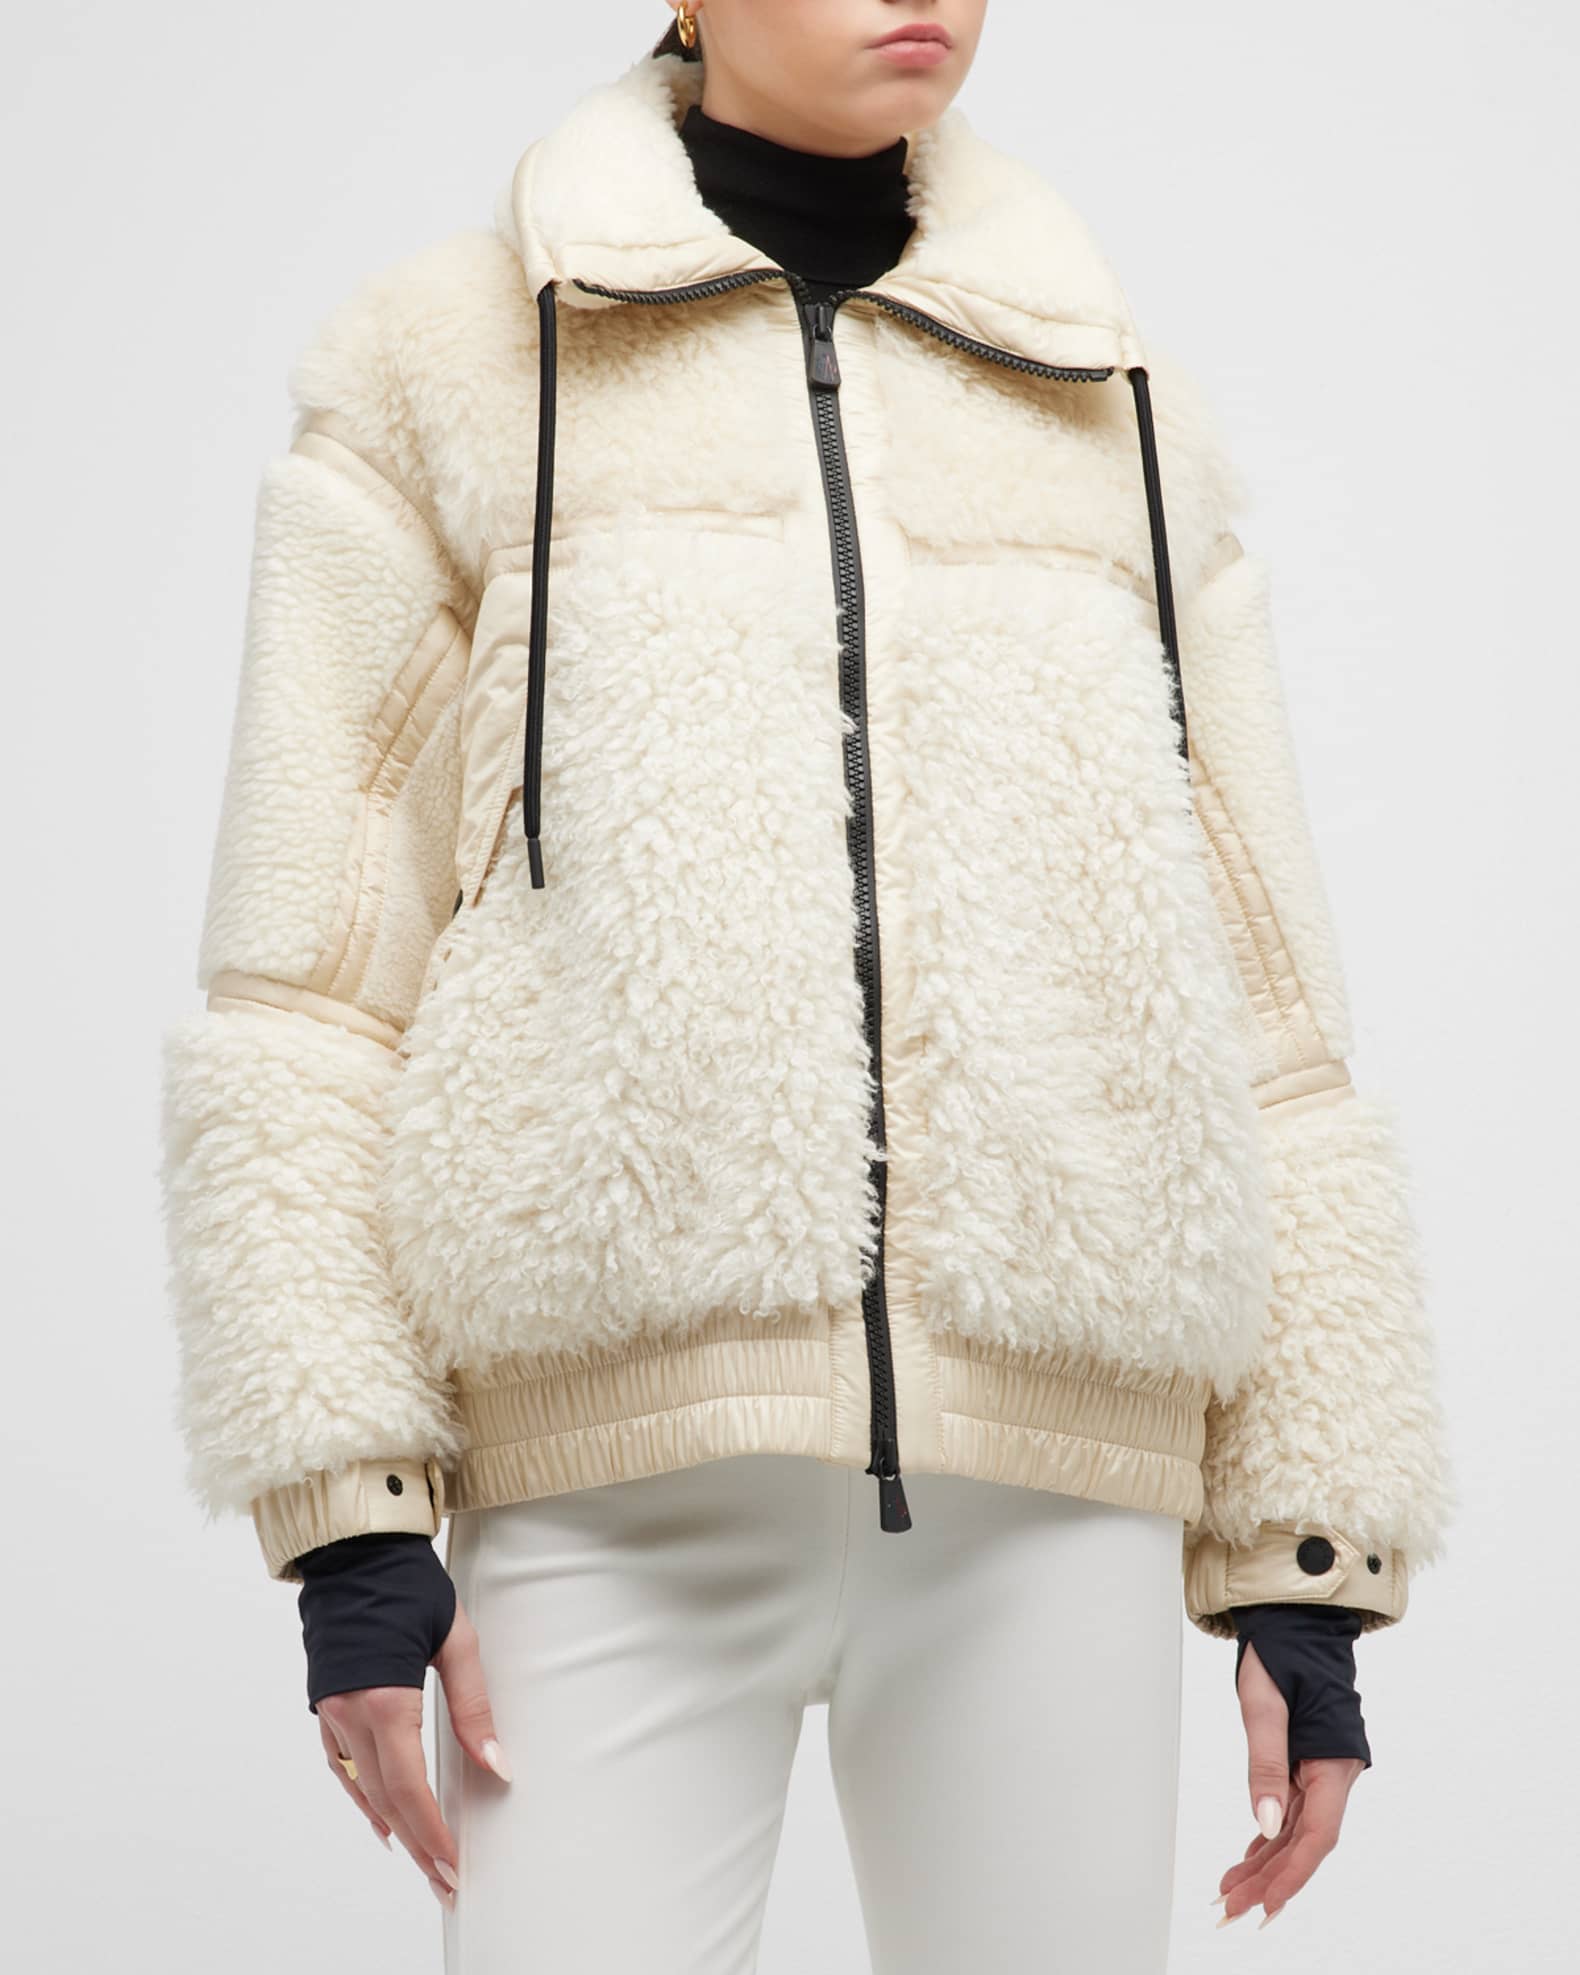 Moncler Grenoble Yvoire Mixed Media Shearling Bomber Jacket | Neiman Marcus